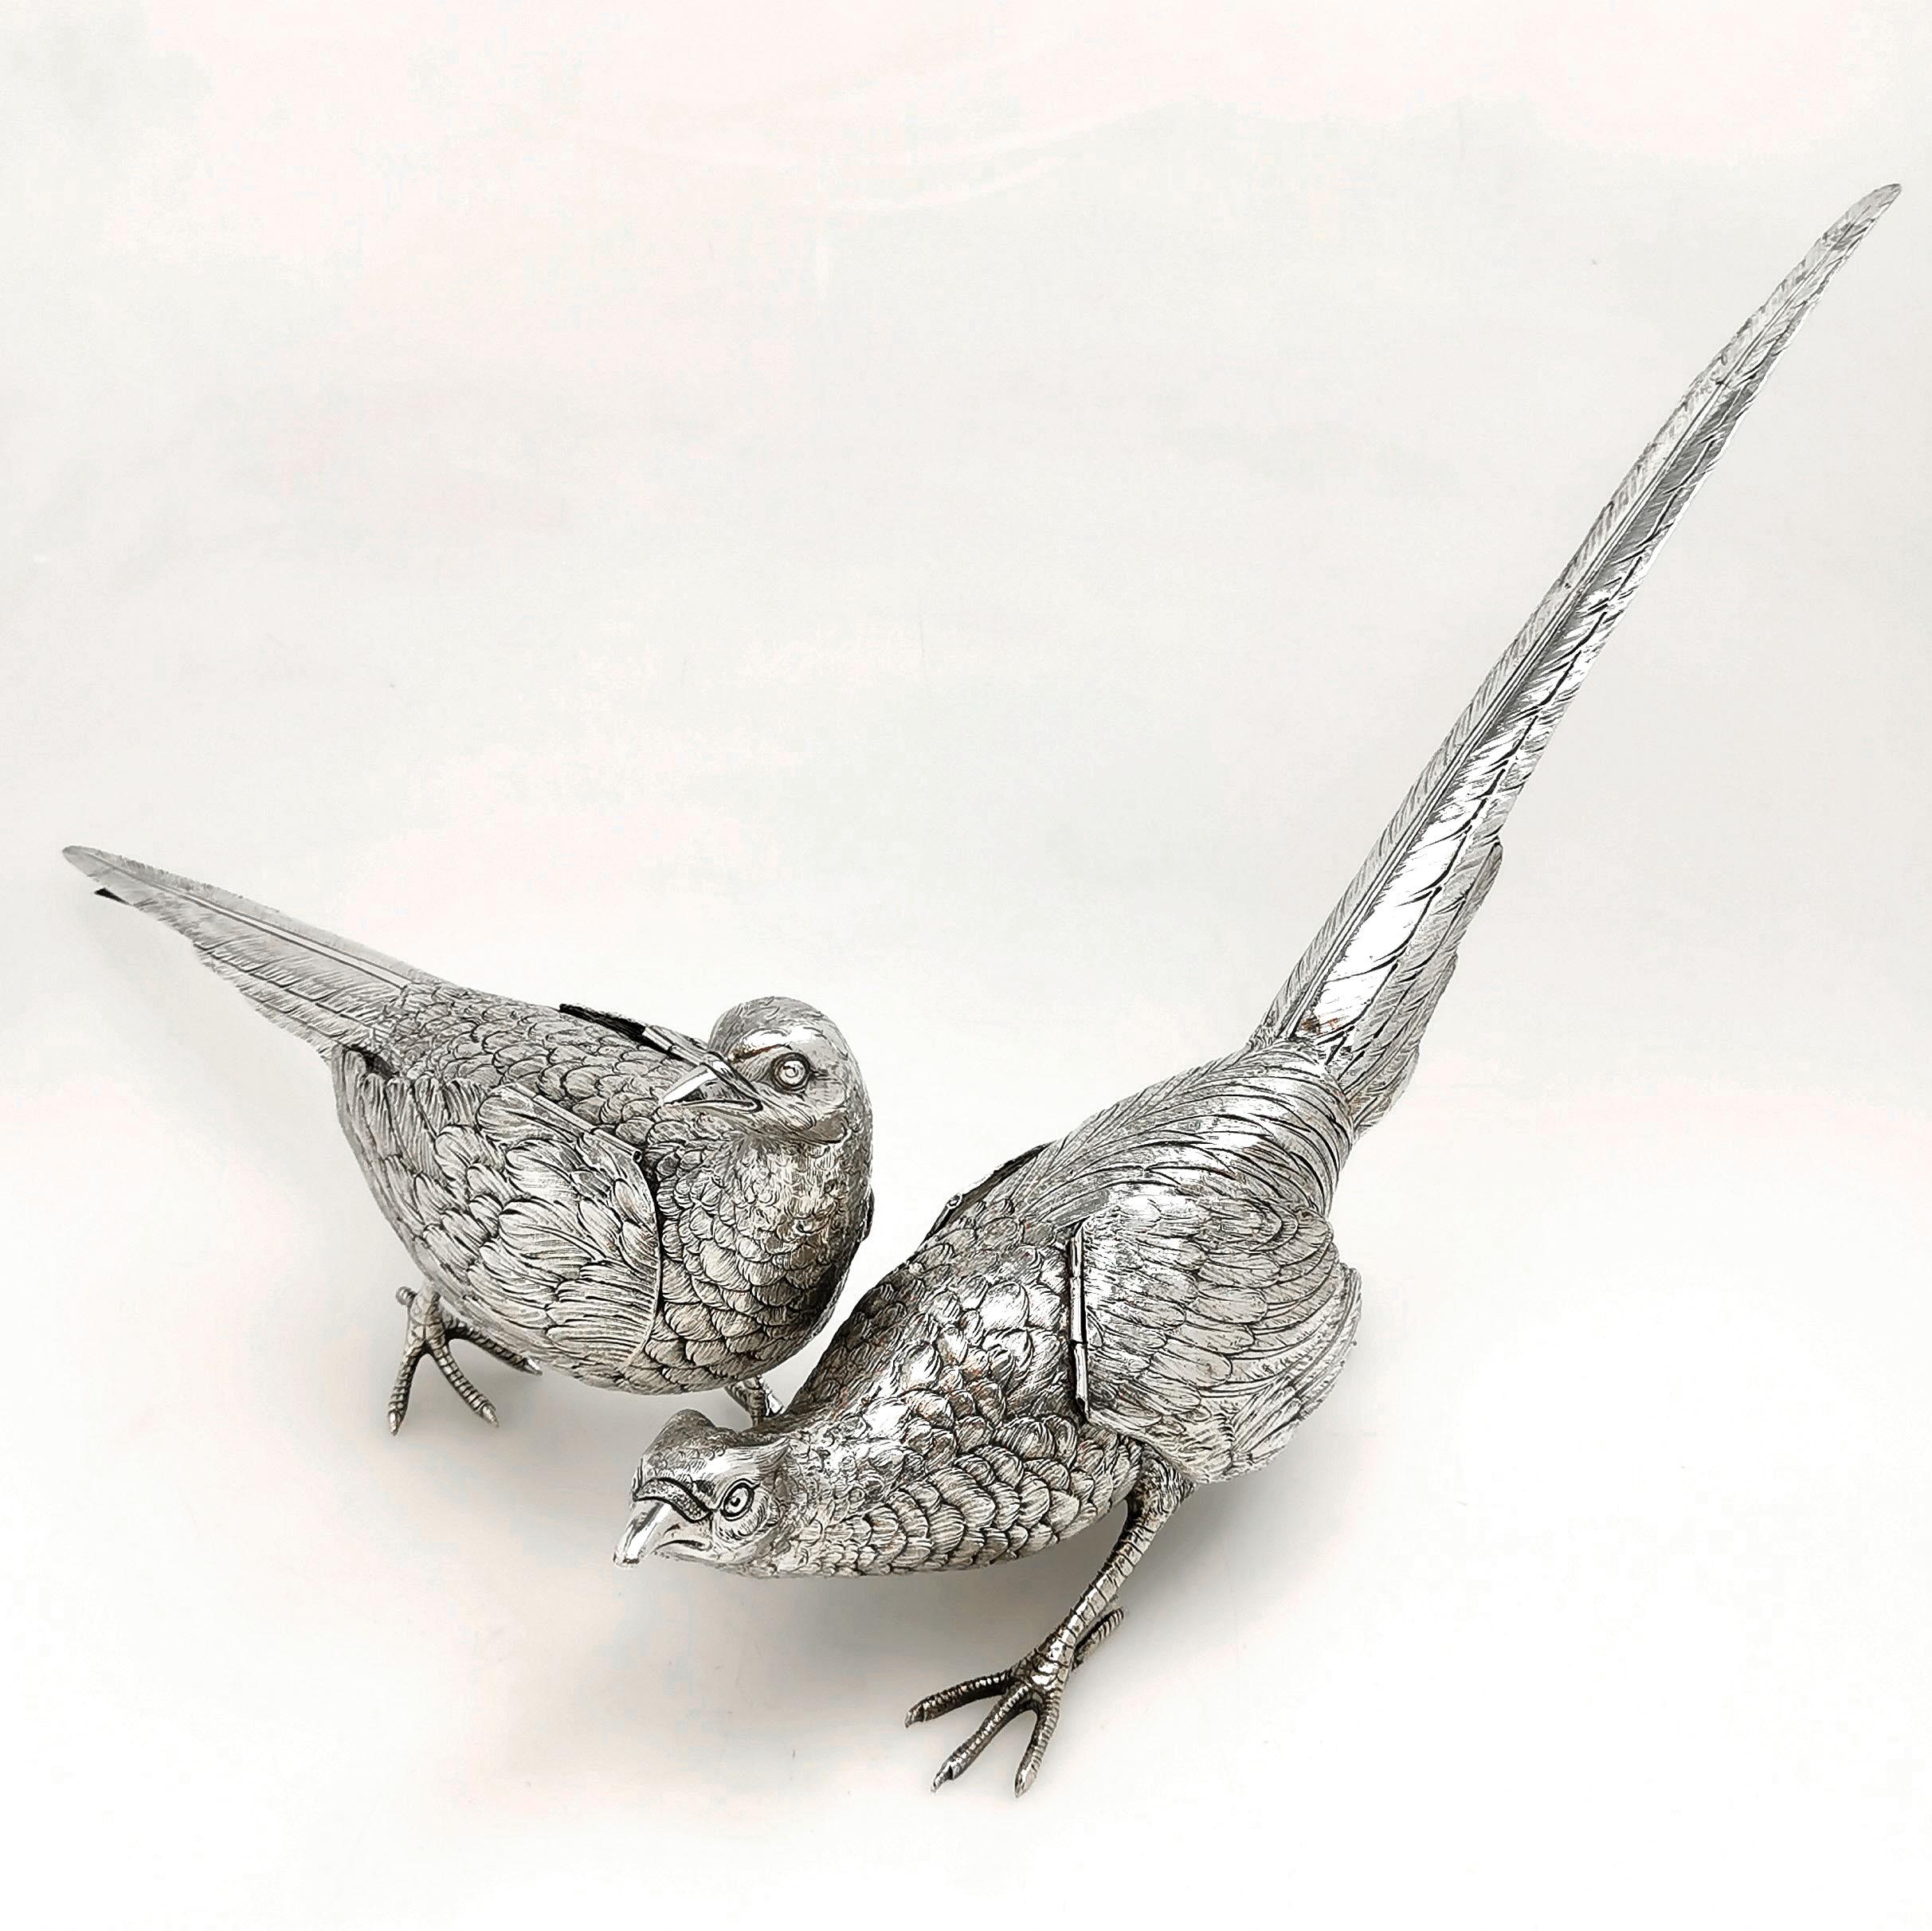 A magnificent pair of Antique Solid Silver Pheasants of substantial size. These model Pheasants are created with a lovely attention to detail and each features a pair of hinged wings. Each Pheasant is unique - one is a cock and one a hen and each